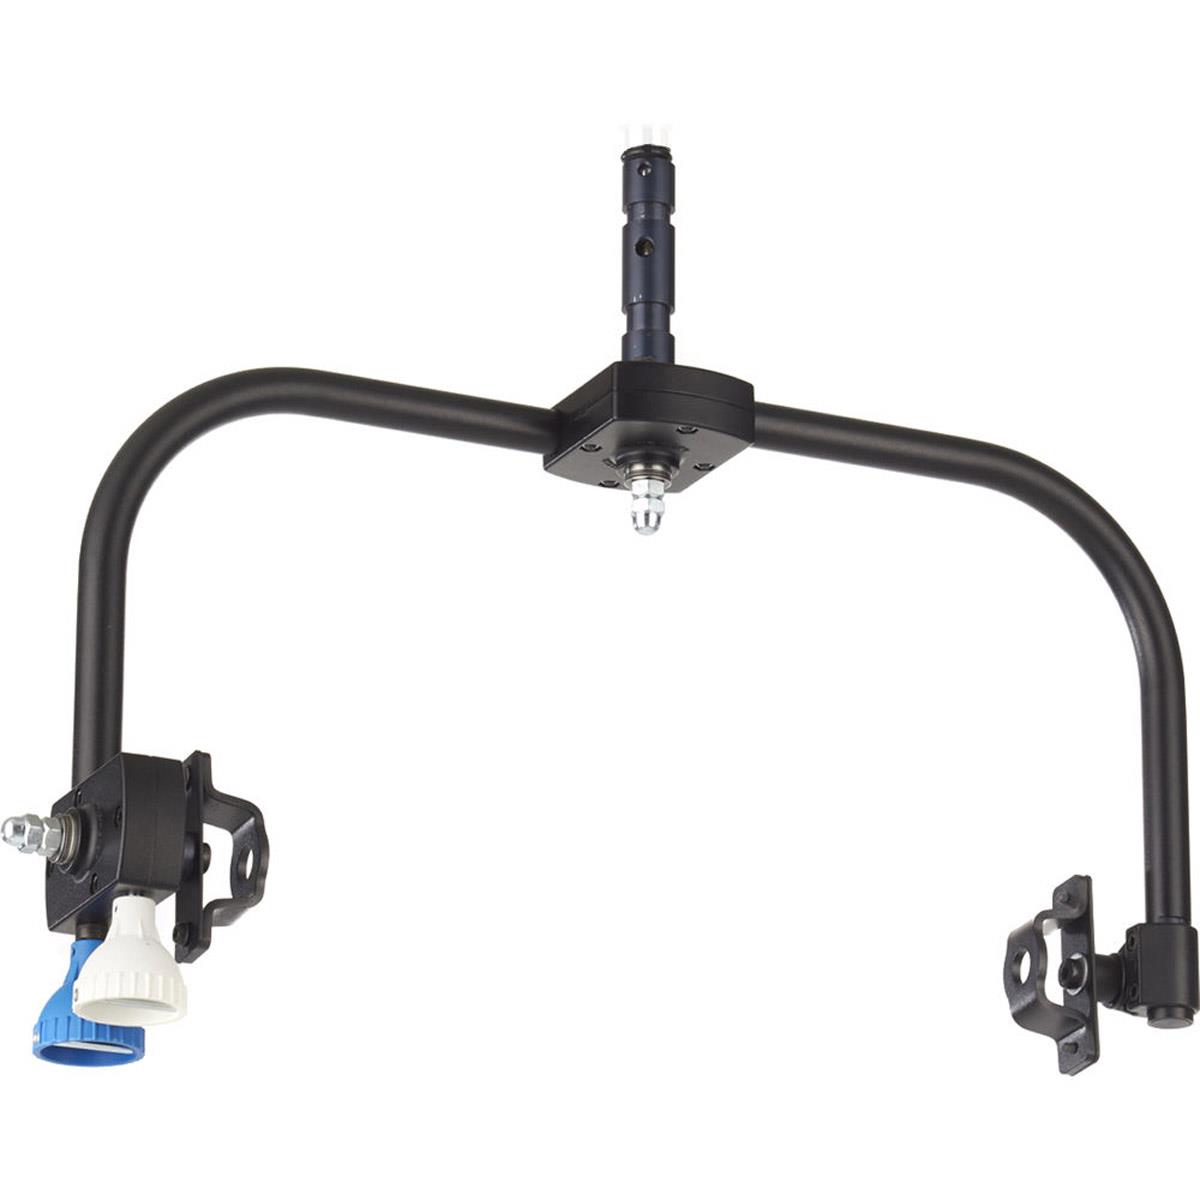 Image of Litepanels Pole Operated Yoke for Hilio D12 and T12 LED Lights